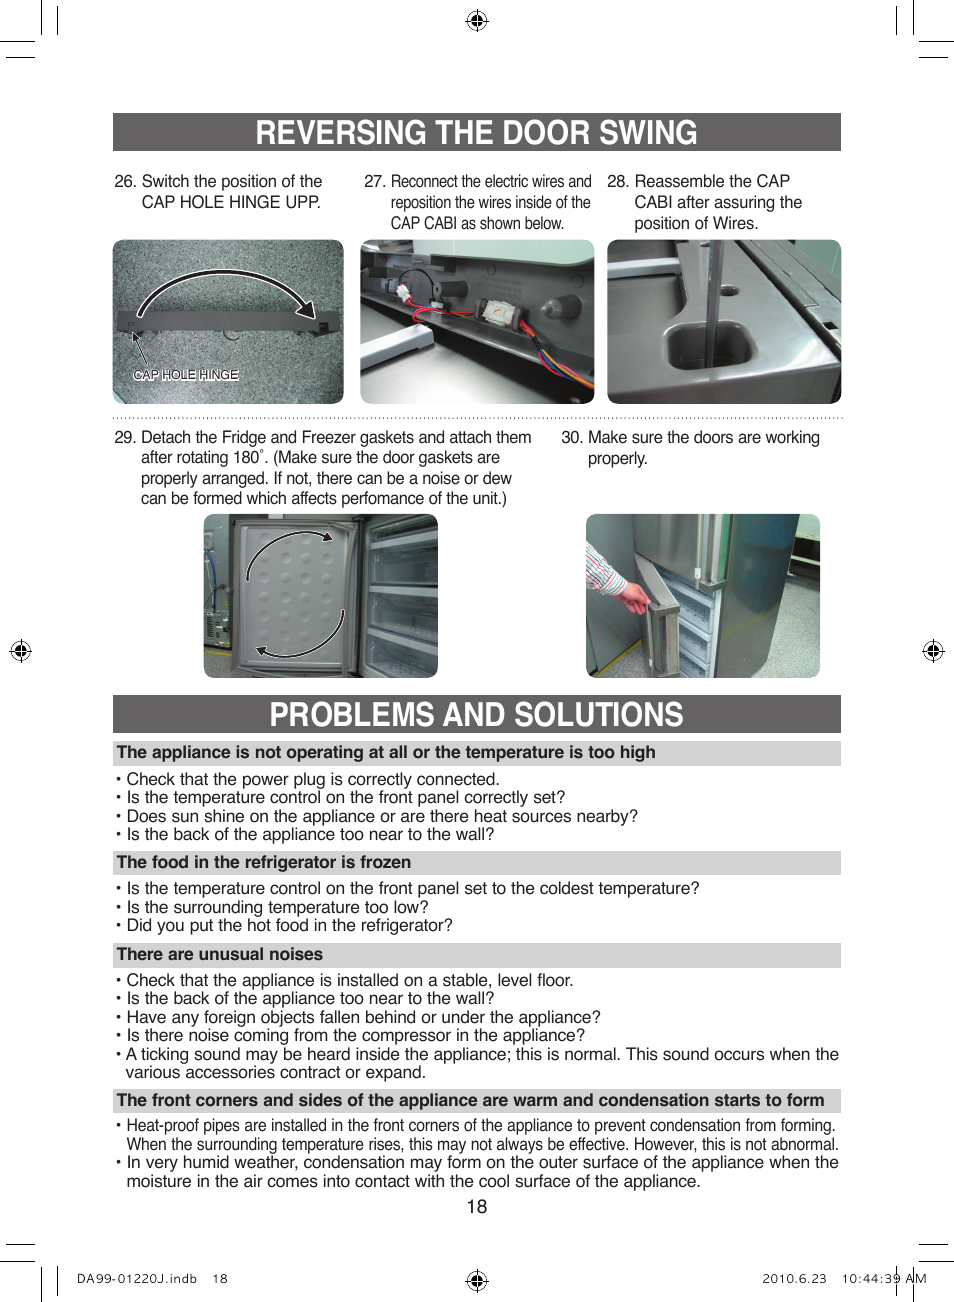 Reversing the door swing, Problems and solutions | Samsung RL41WCSW User  Manual | Page 18 / 100